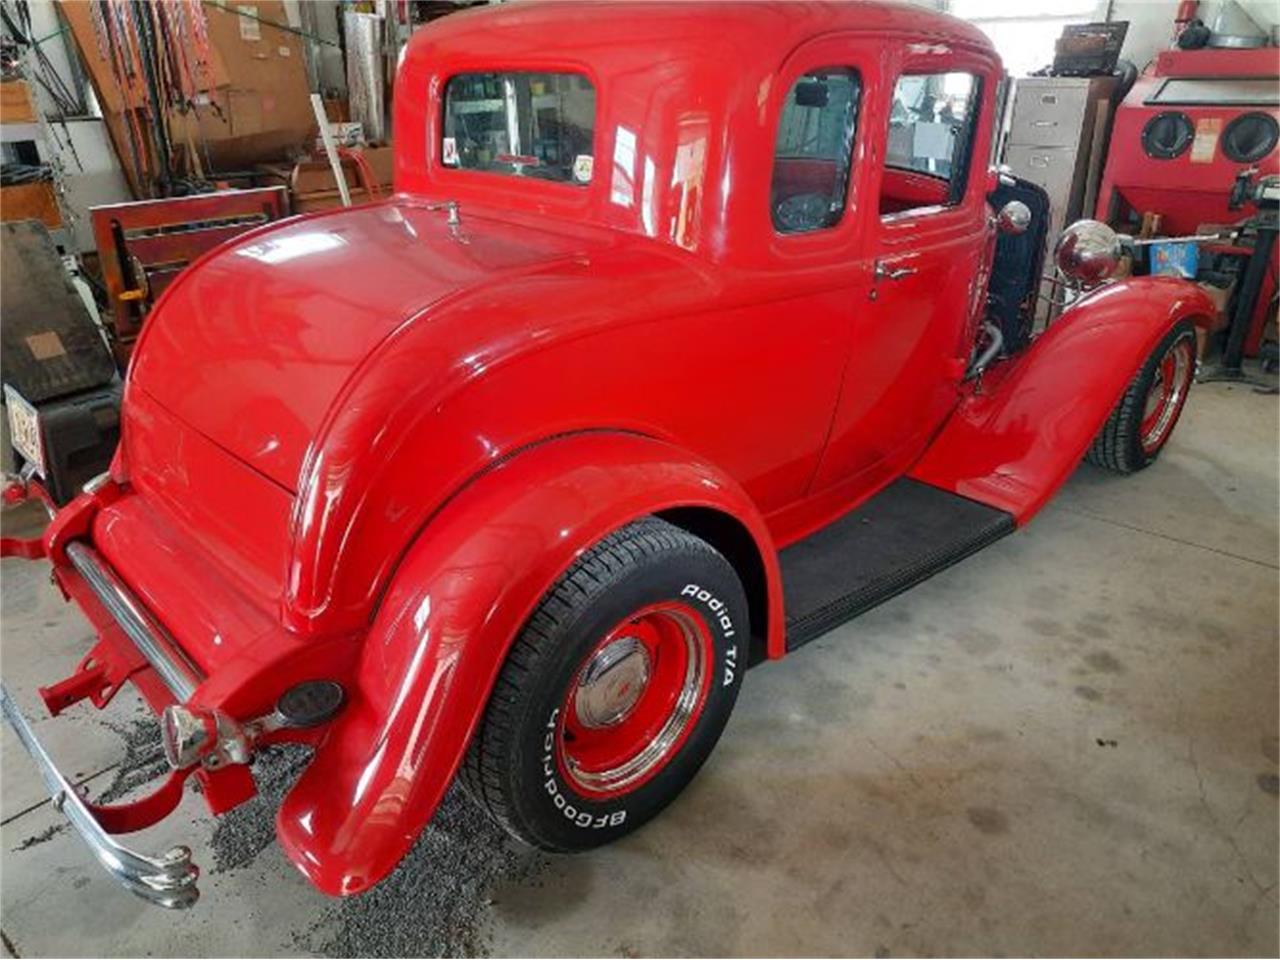 1932 Ford Coupe for sale in Cadillac, MI – photo 2